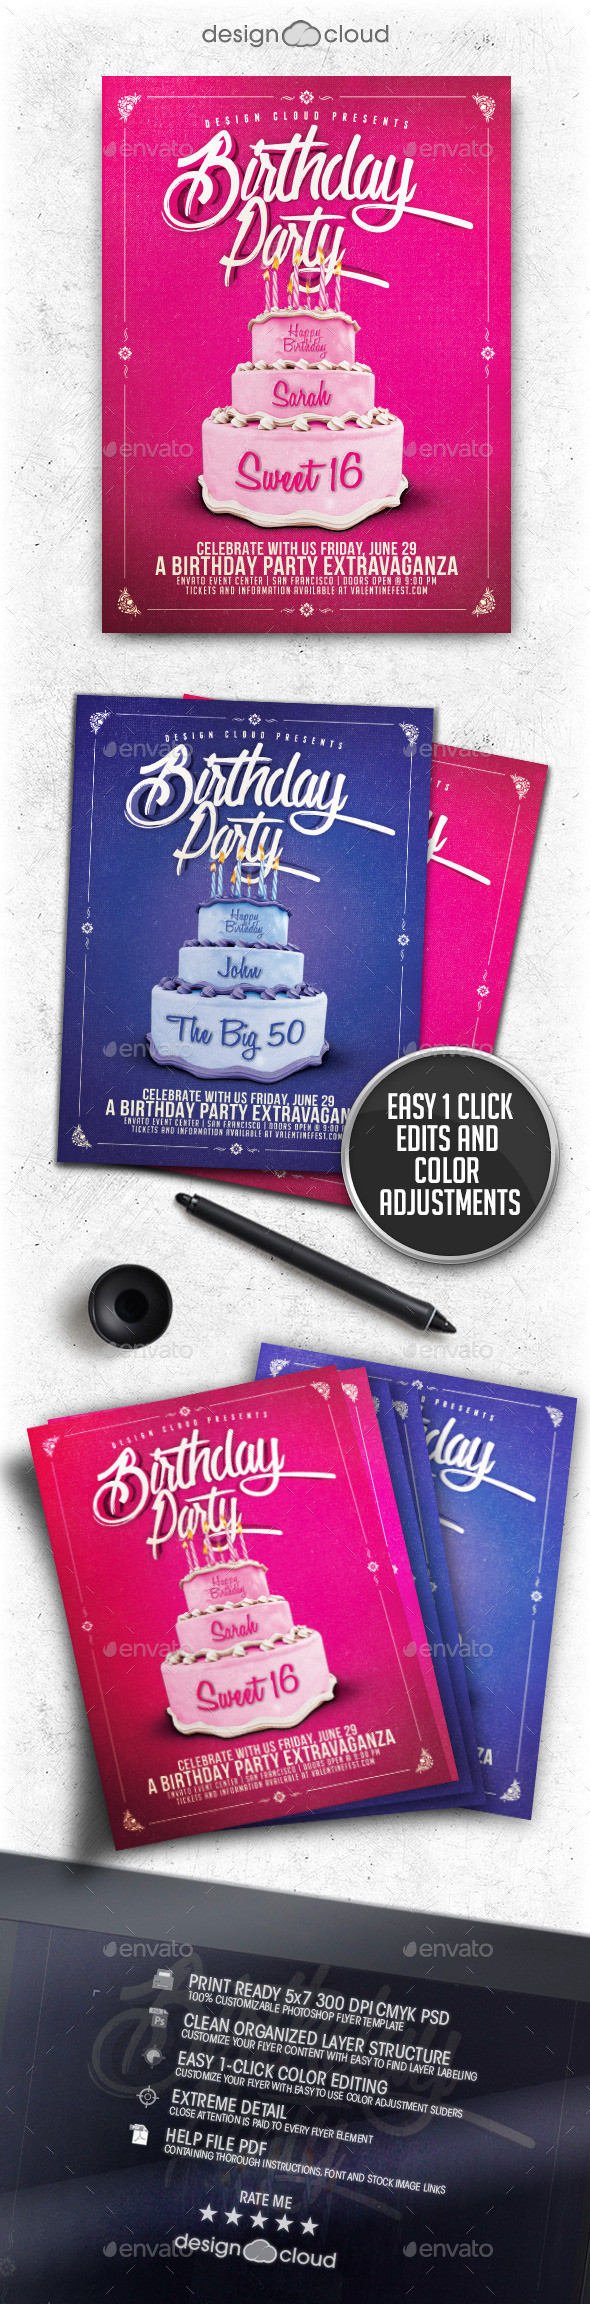 Preview birthday party cake flyer template